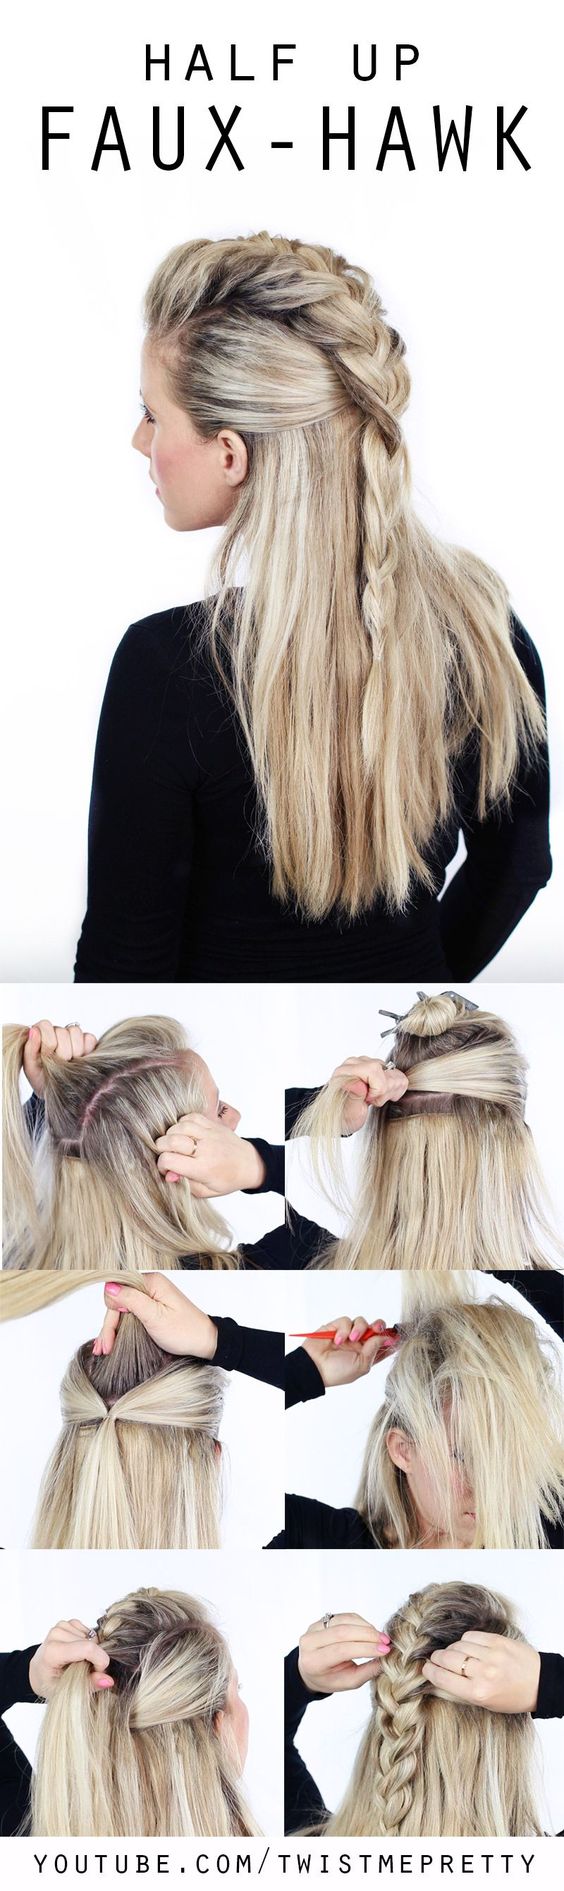 Easy, Stylish Braided Hairstyles for Long Hair , Inspired Creative Braided Hairstyle